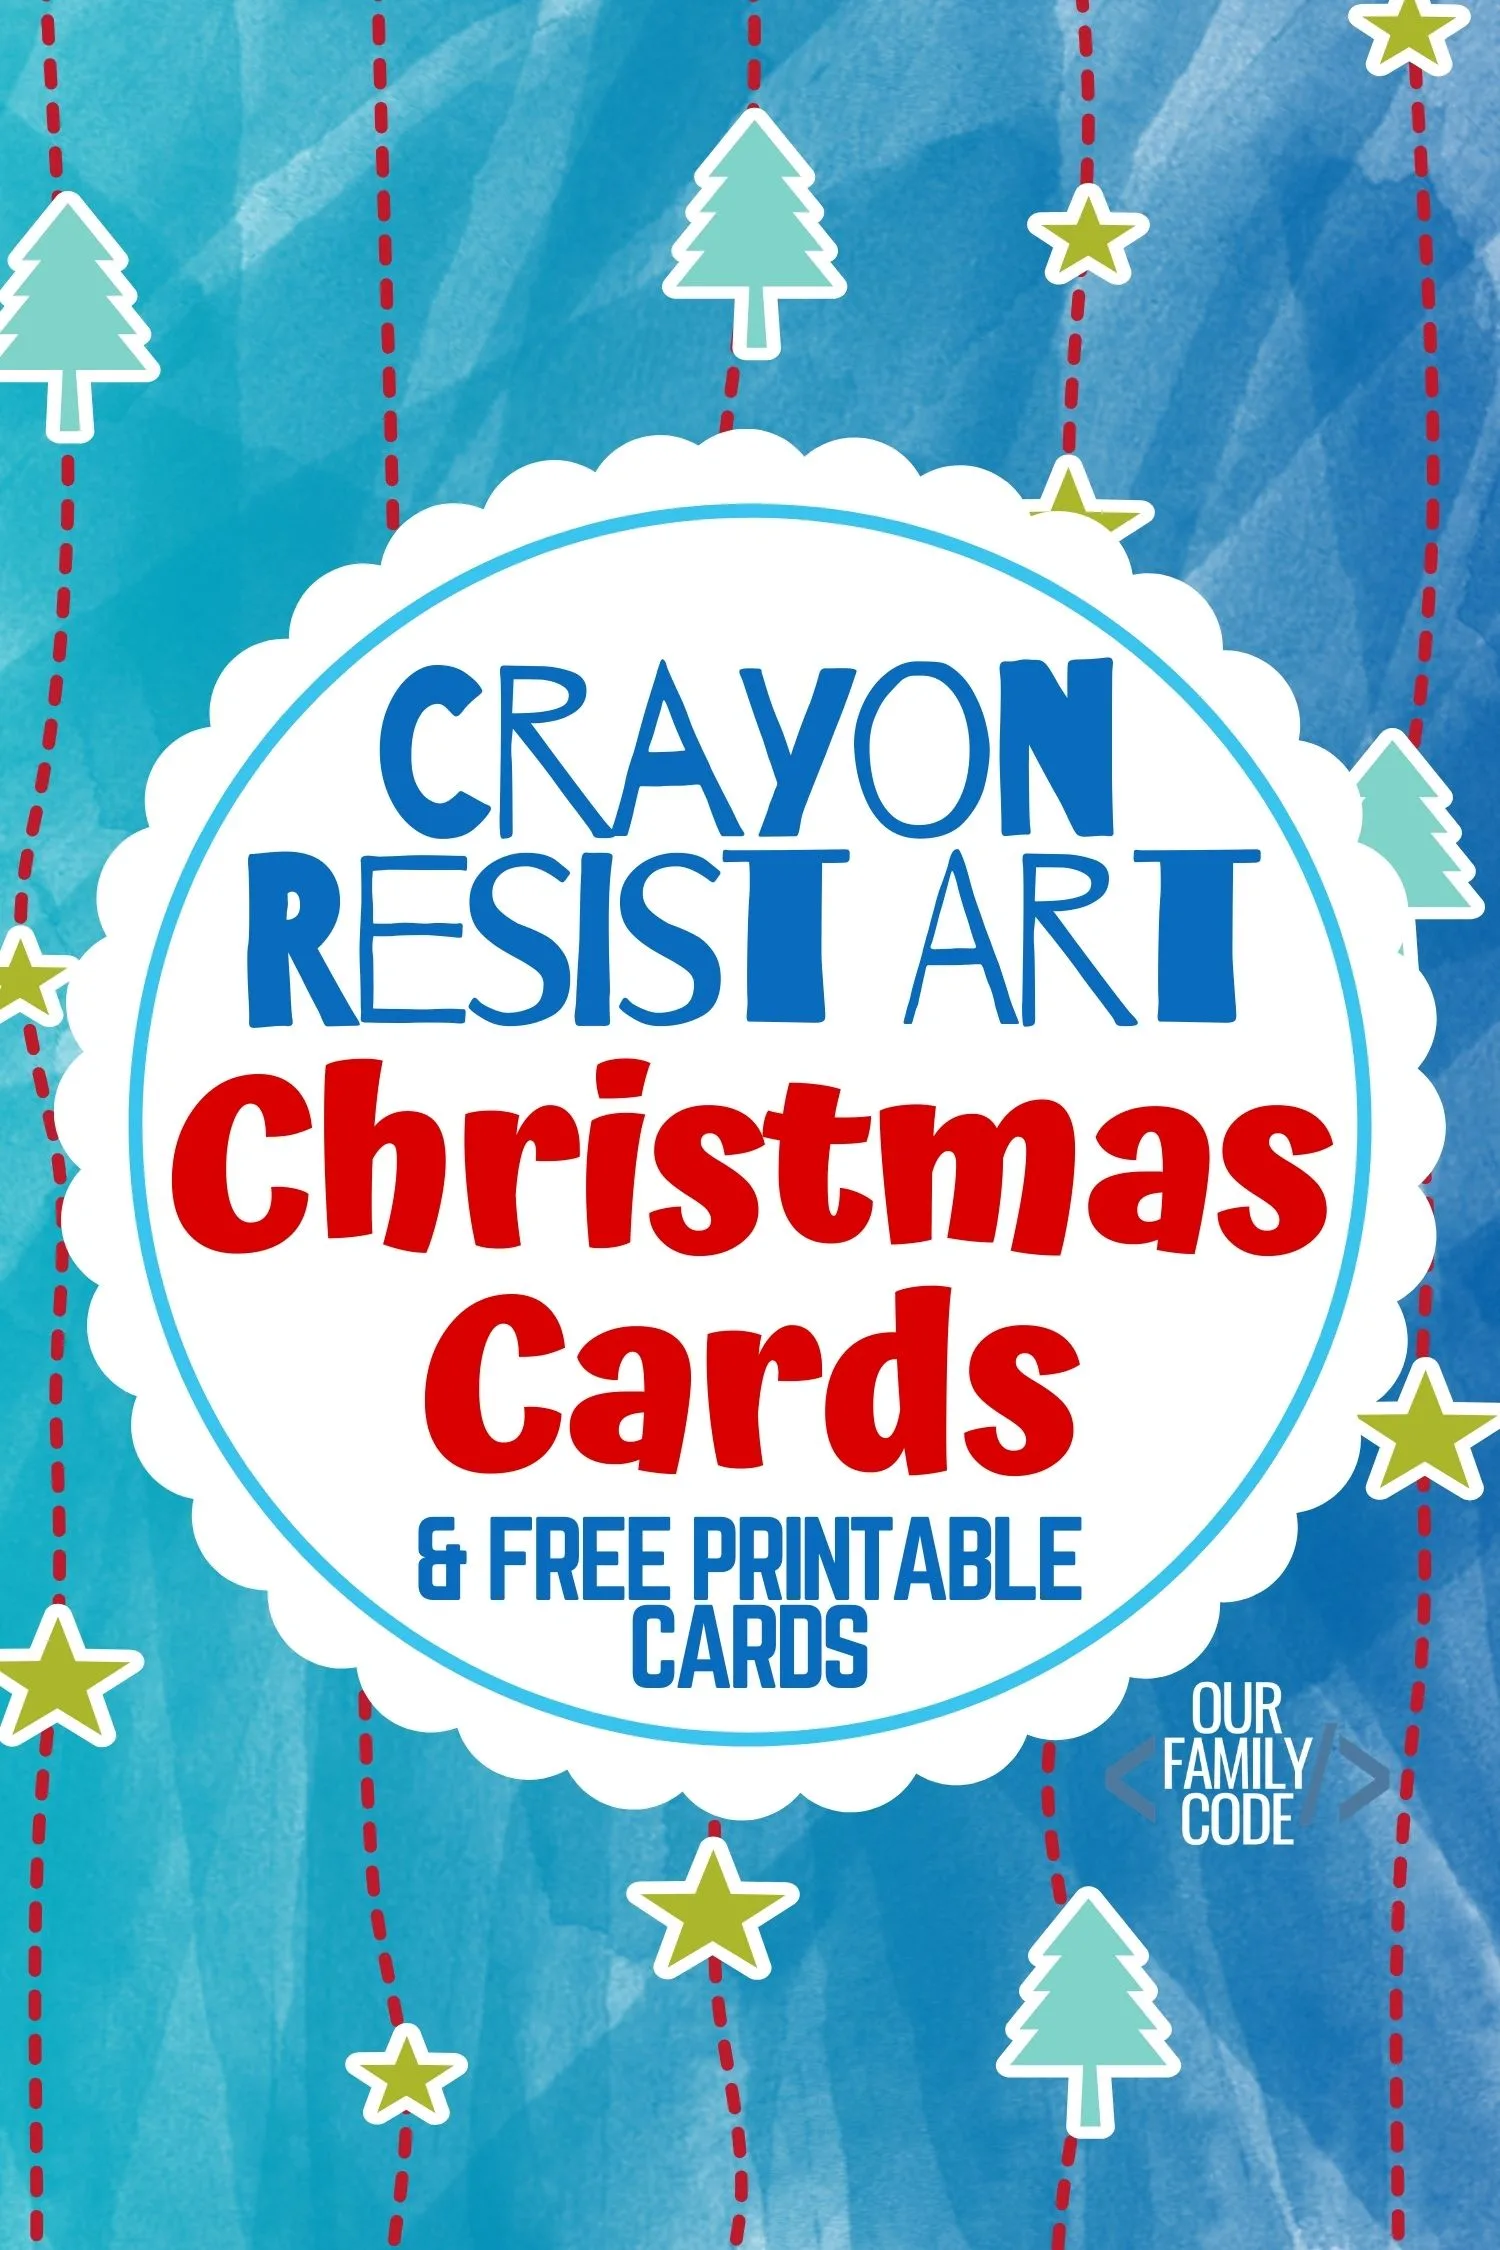 It's the perfect time to make crayon resist Christmas cards! This science + art activity is a great way to incorporate science into the holidays! #Christmascrafts #kidcrafts #kidmadexmas #STEAM #artprojectsforkids